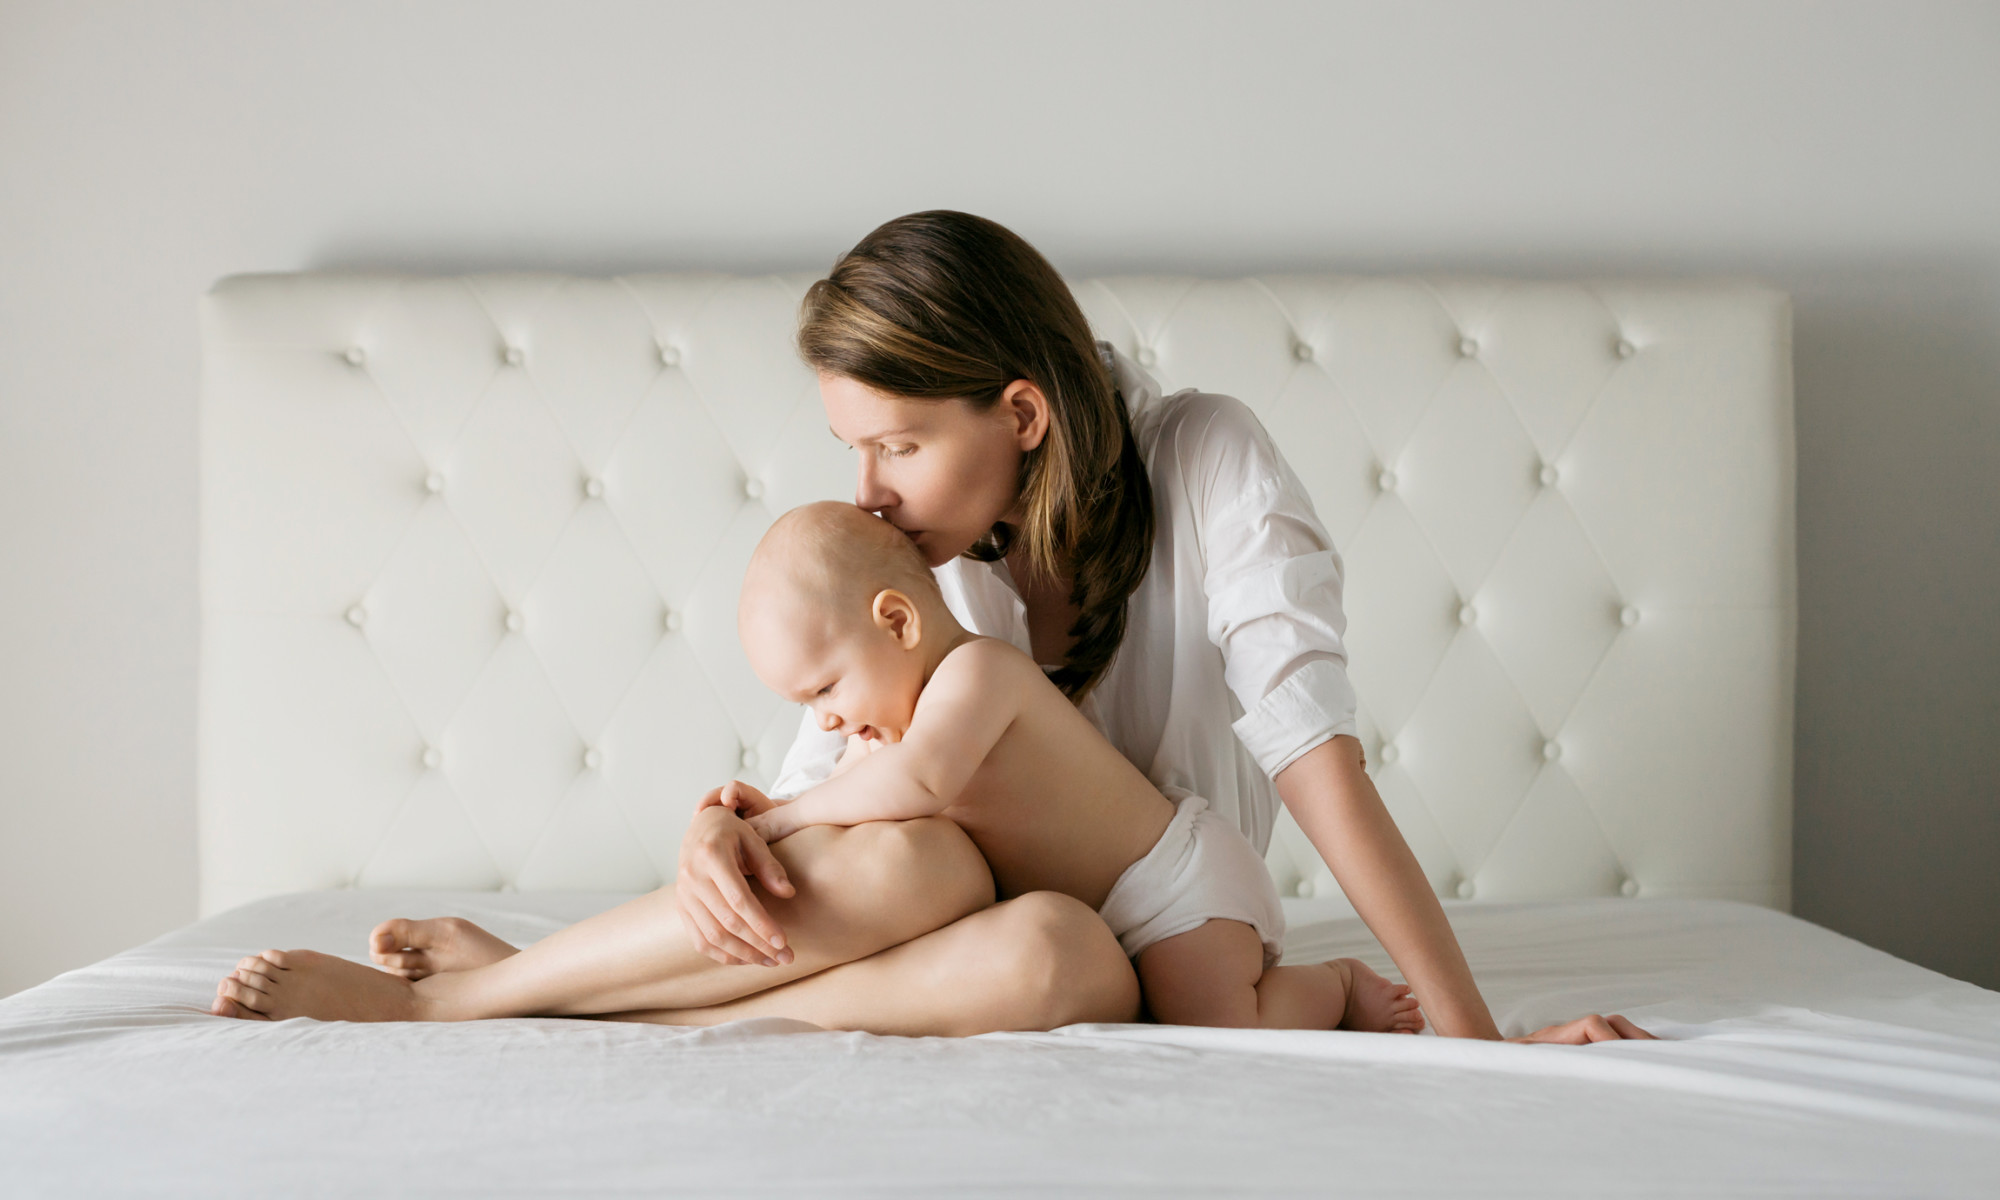 Cloth Or Disposable Diapers? An Expert Weighs The Pros and Cons mindbodygreen